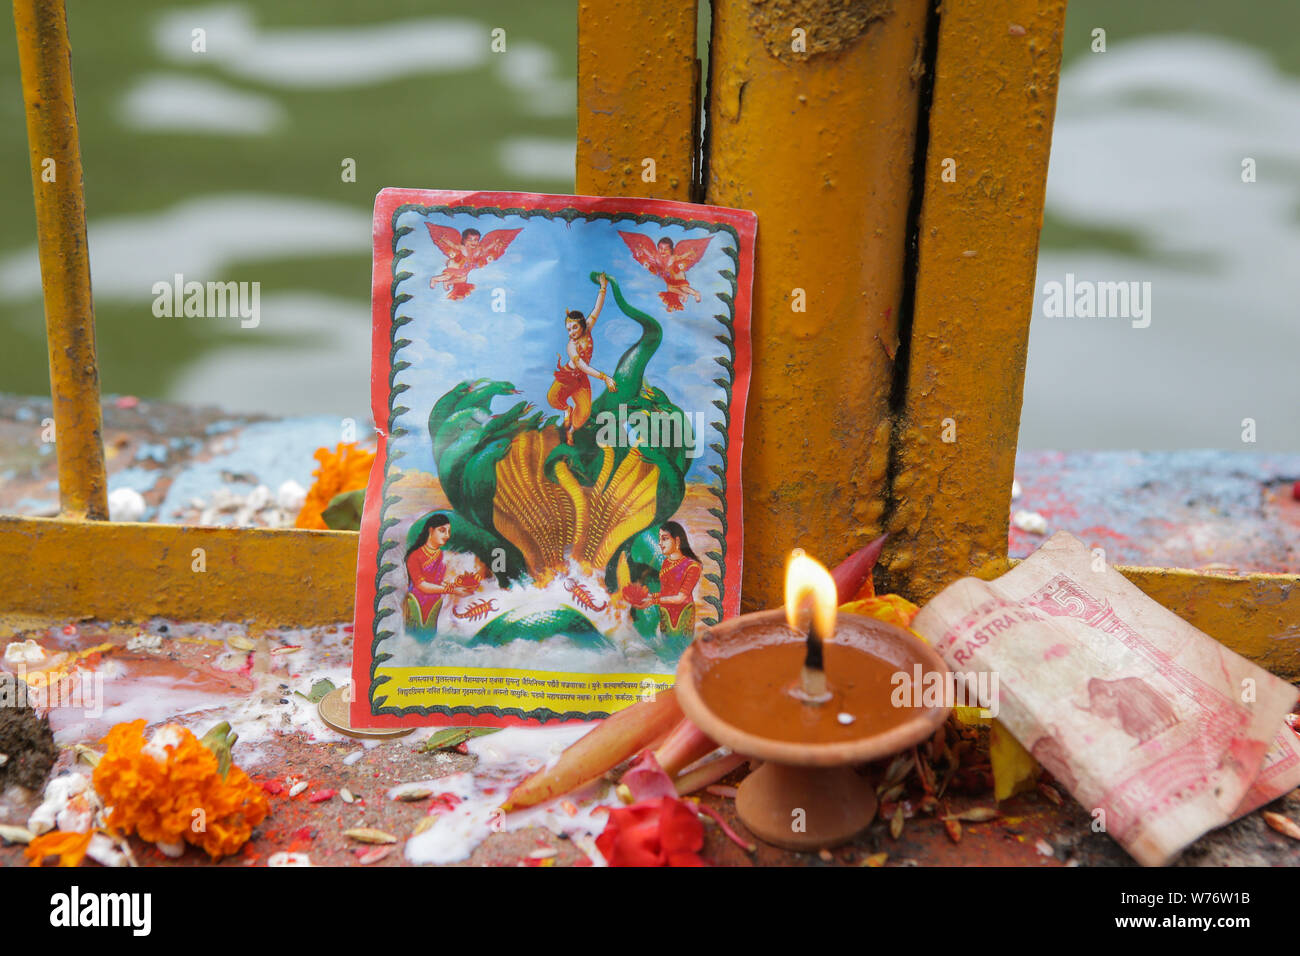 An image of snake god at the Nagpokhari during a Festival.Nag-Panchami is a festival to worship snakes or serpents, it’s observed by Hindus all over the world. The festival is observed during the monsoon with prayers and tributes to snakes. Stock Photo